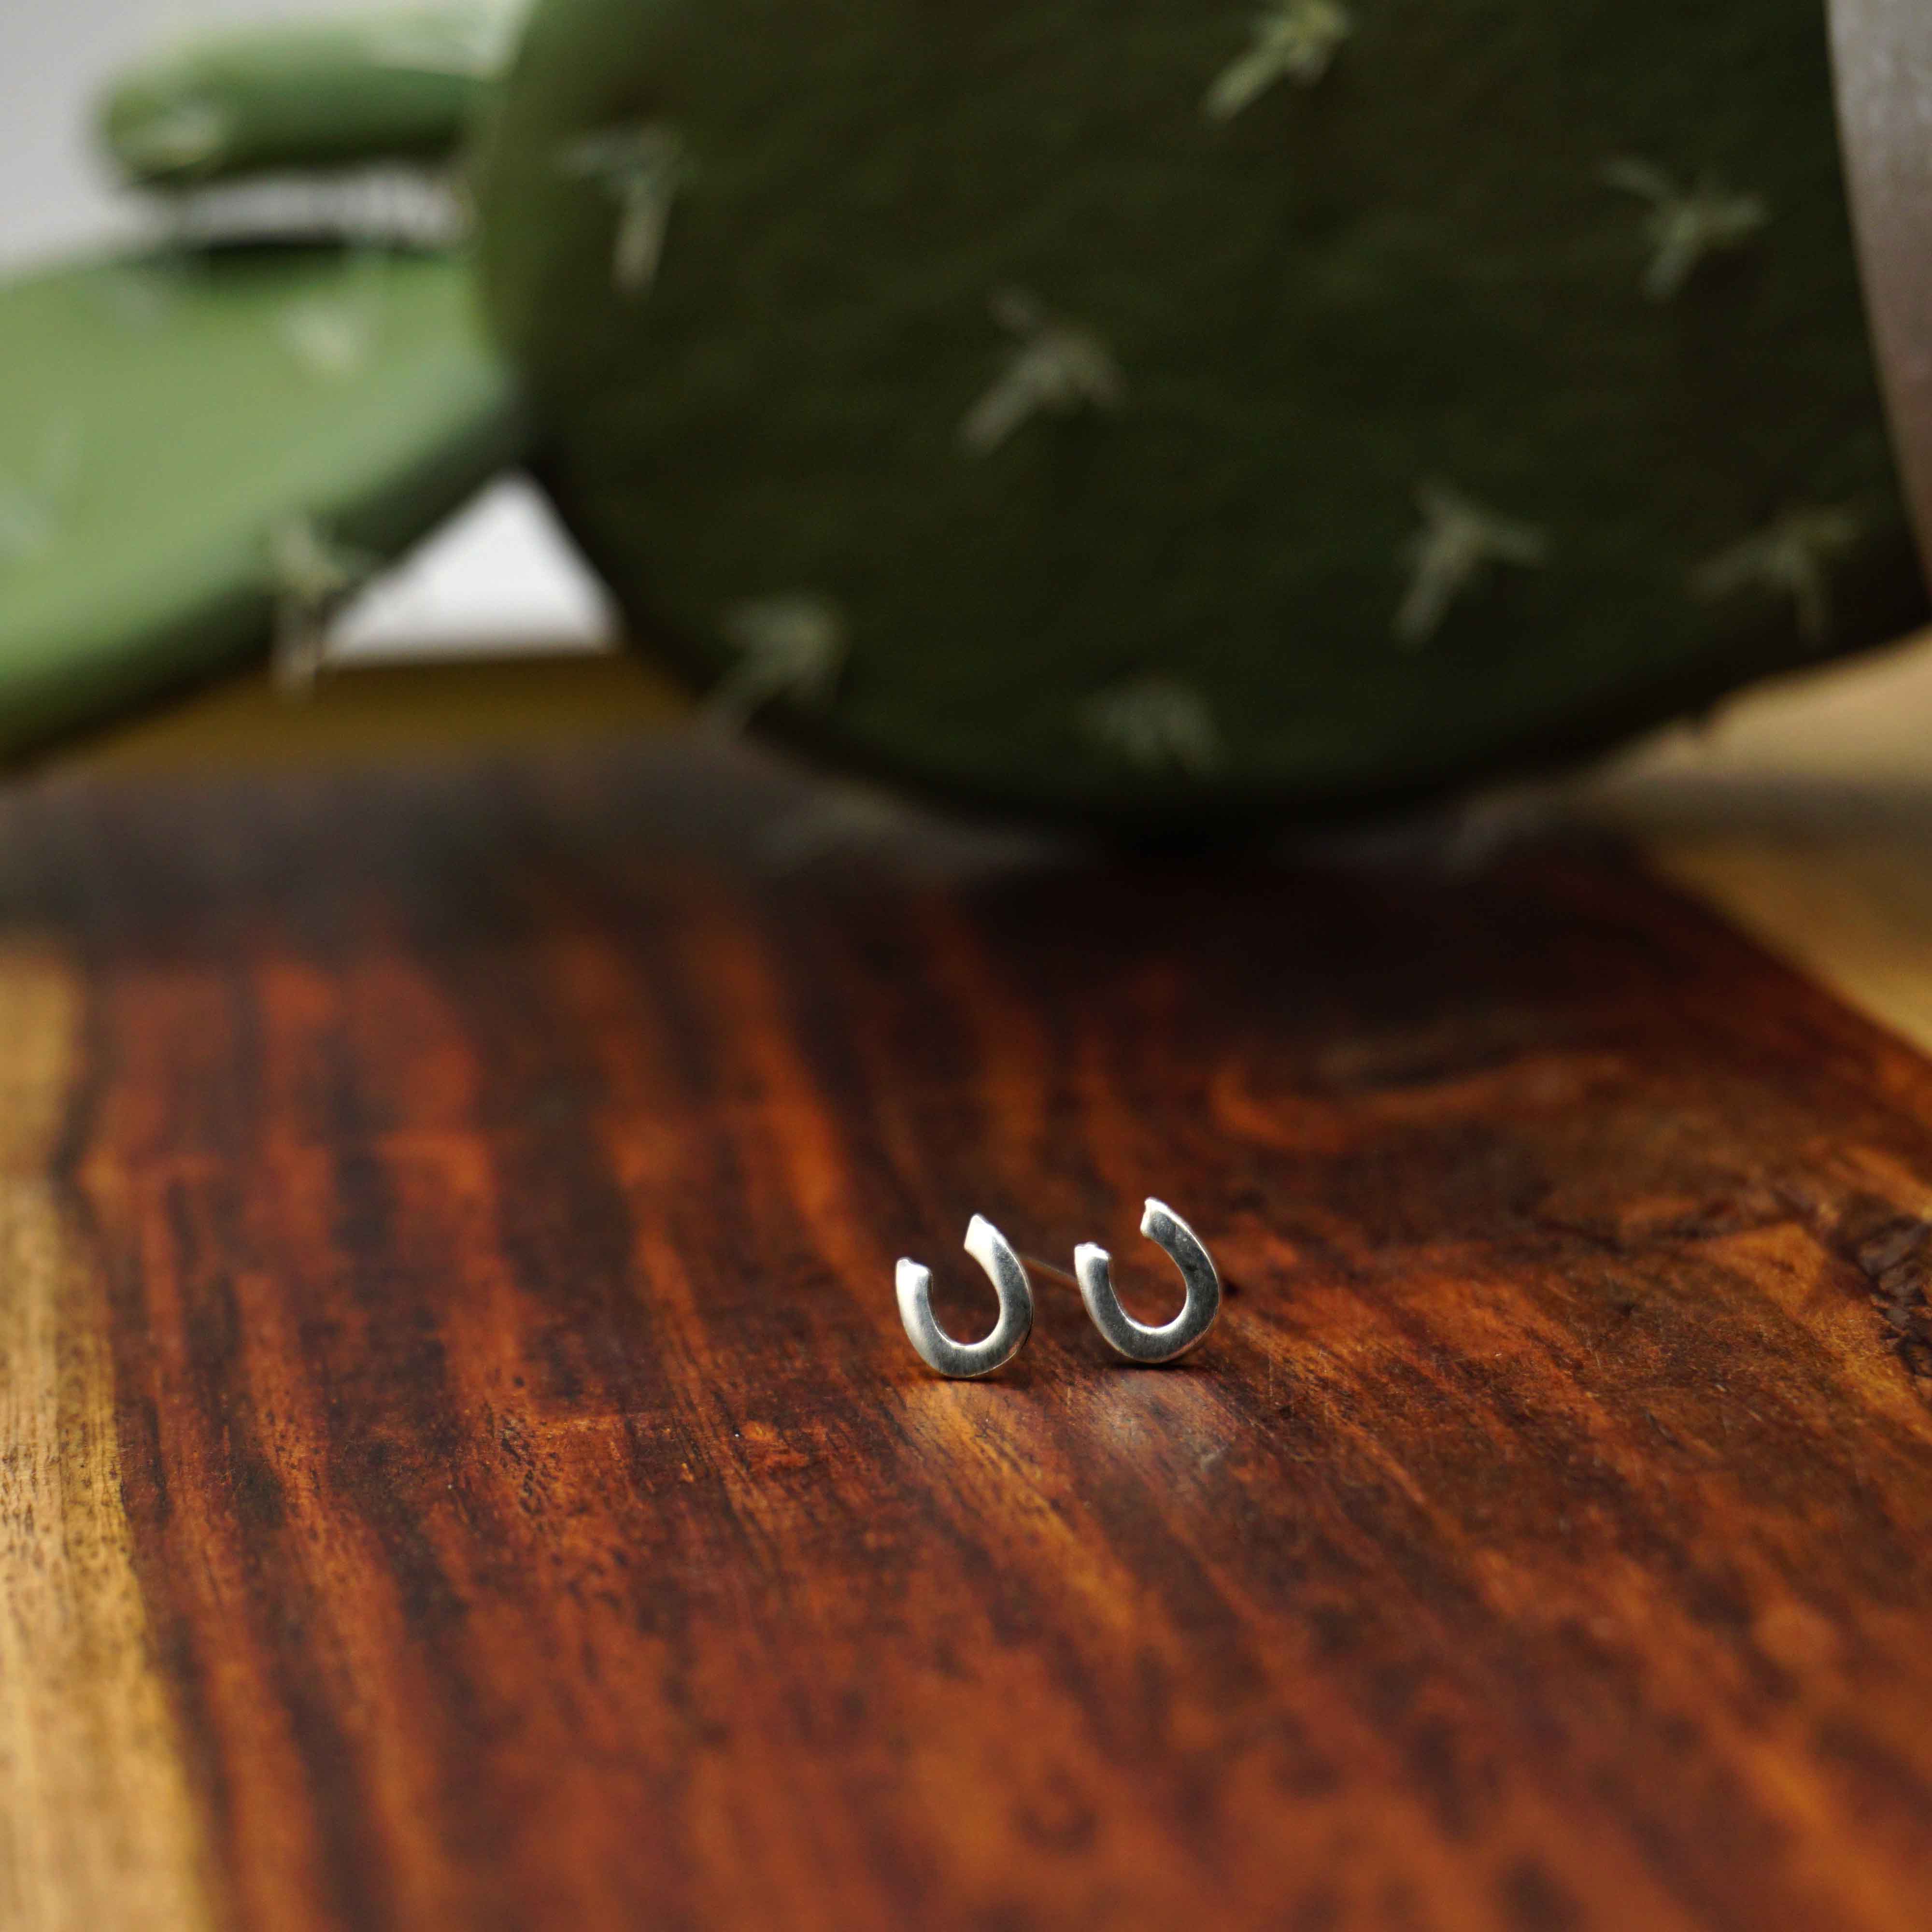 horseshoe sterling silver stud earrings. small dainty horseshoe earring stud posts are inspired by the lucky horseshoe symbol